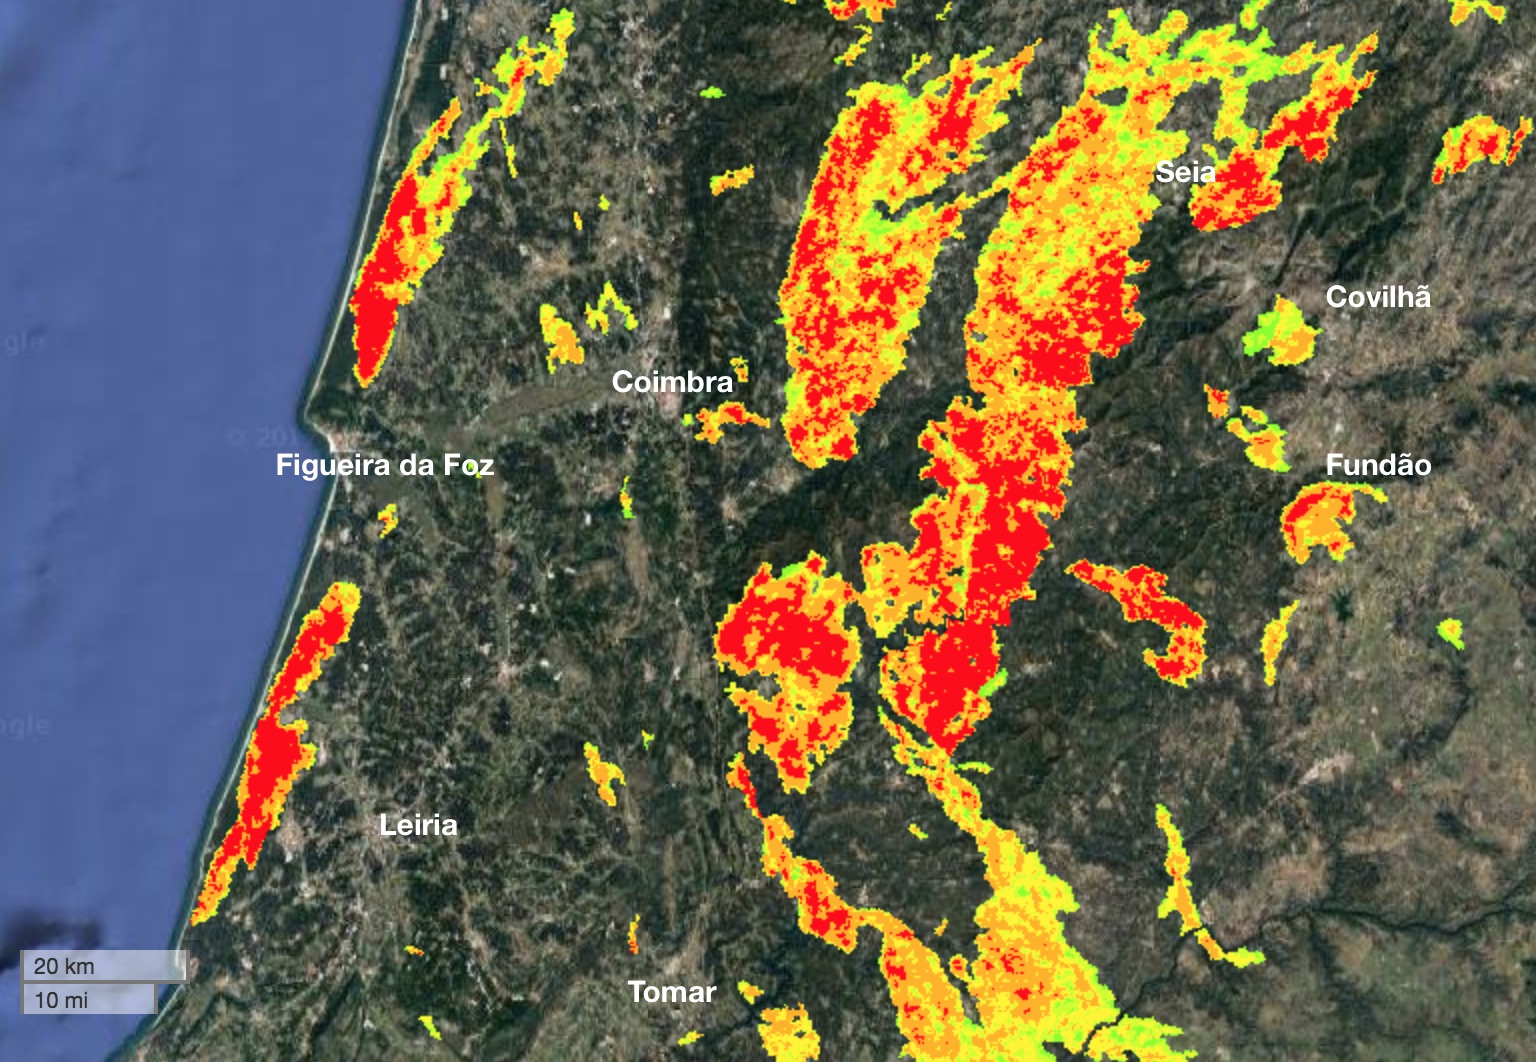 The extent and severity of fires in Central Portugal between October 7-17, 2017